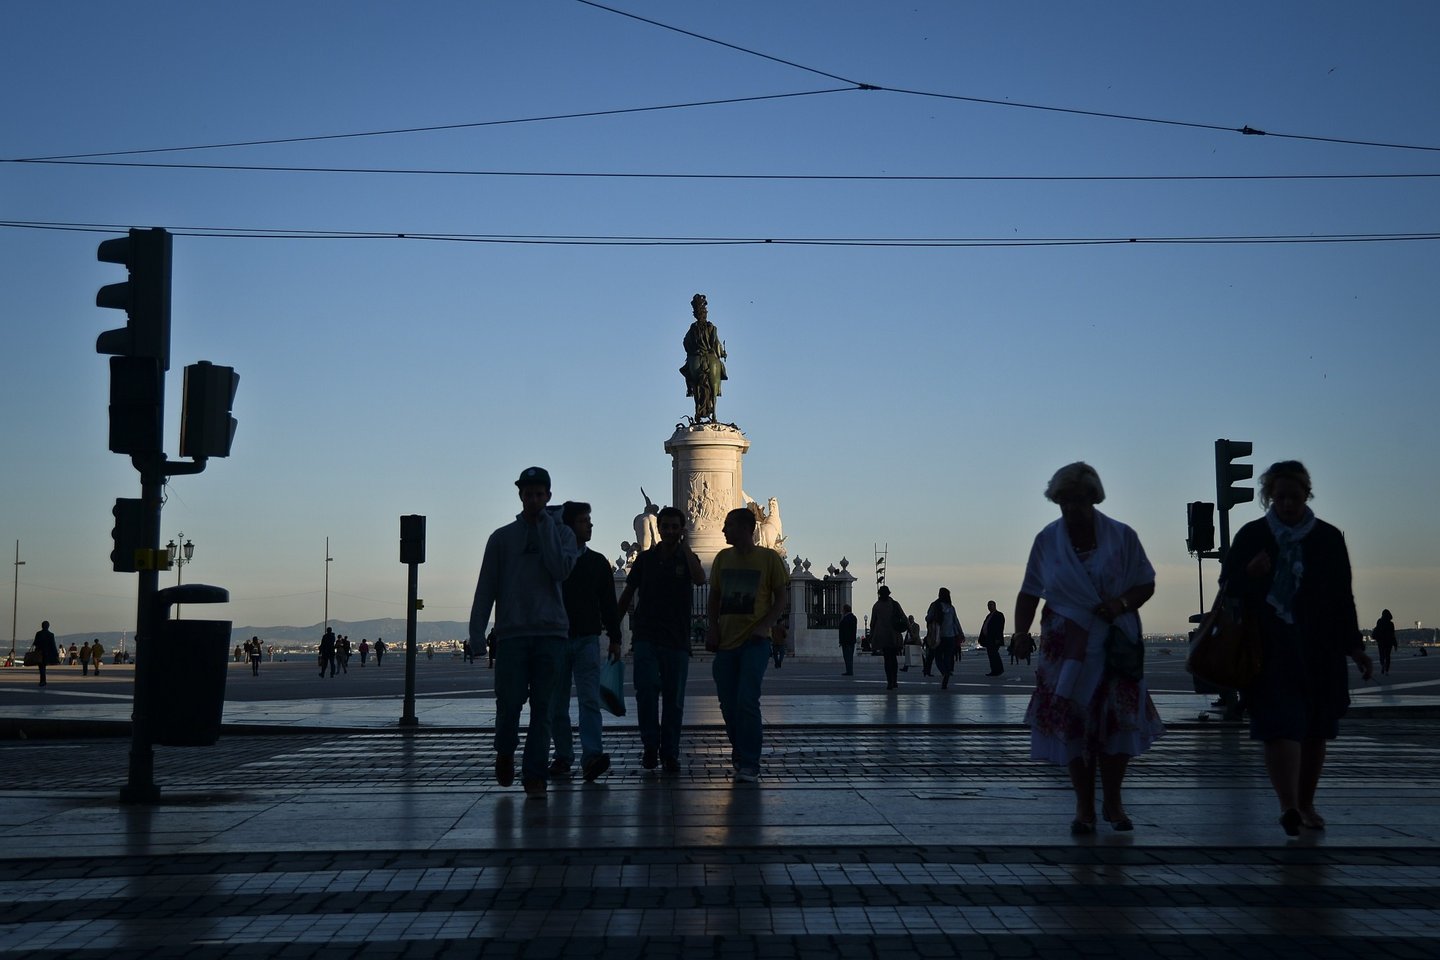 A picture taken on April 28, 2014 shows people passing by Terreiro do Paco Square in downtown Lisbon. AFP PHOTO / PATRICIA DE MELO MOREIRA (Photo credit should read PATRICIA DE MELO MOREIRA/AFP/Getty Images)